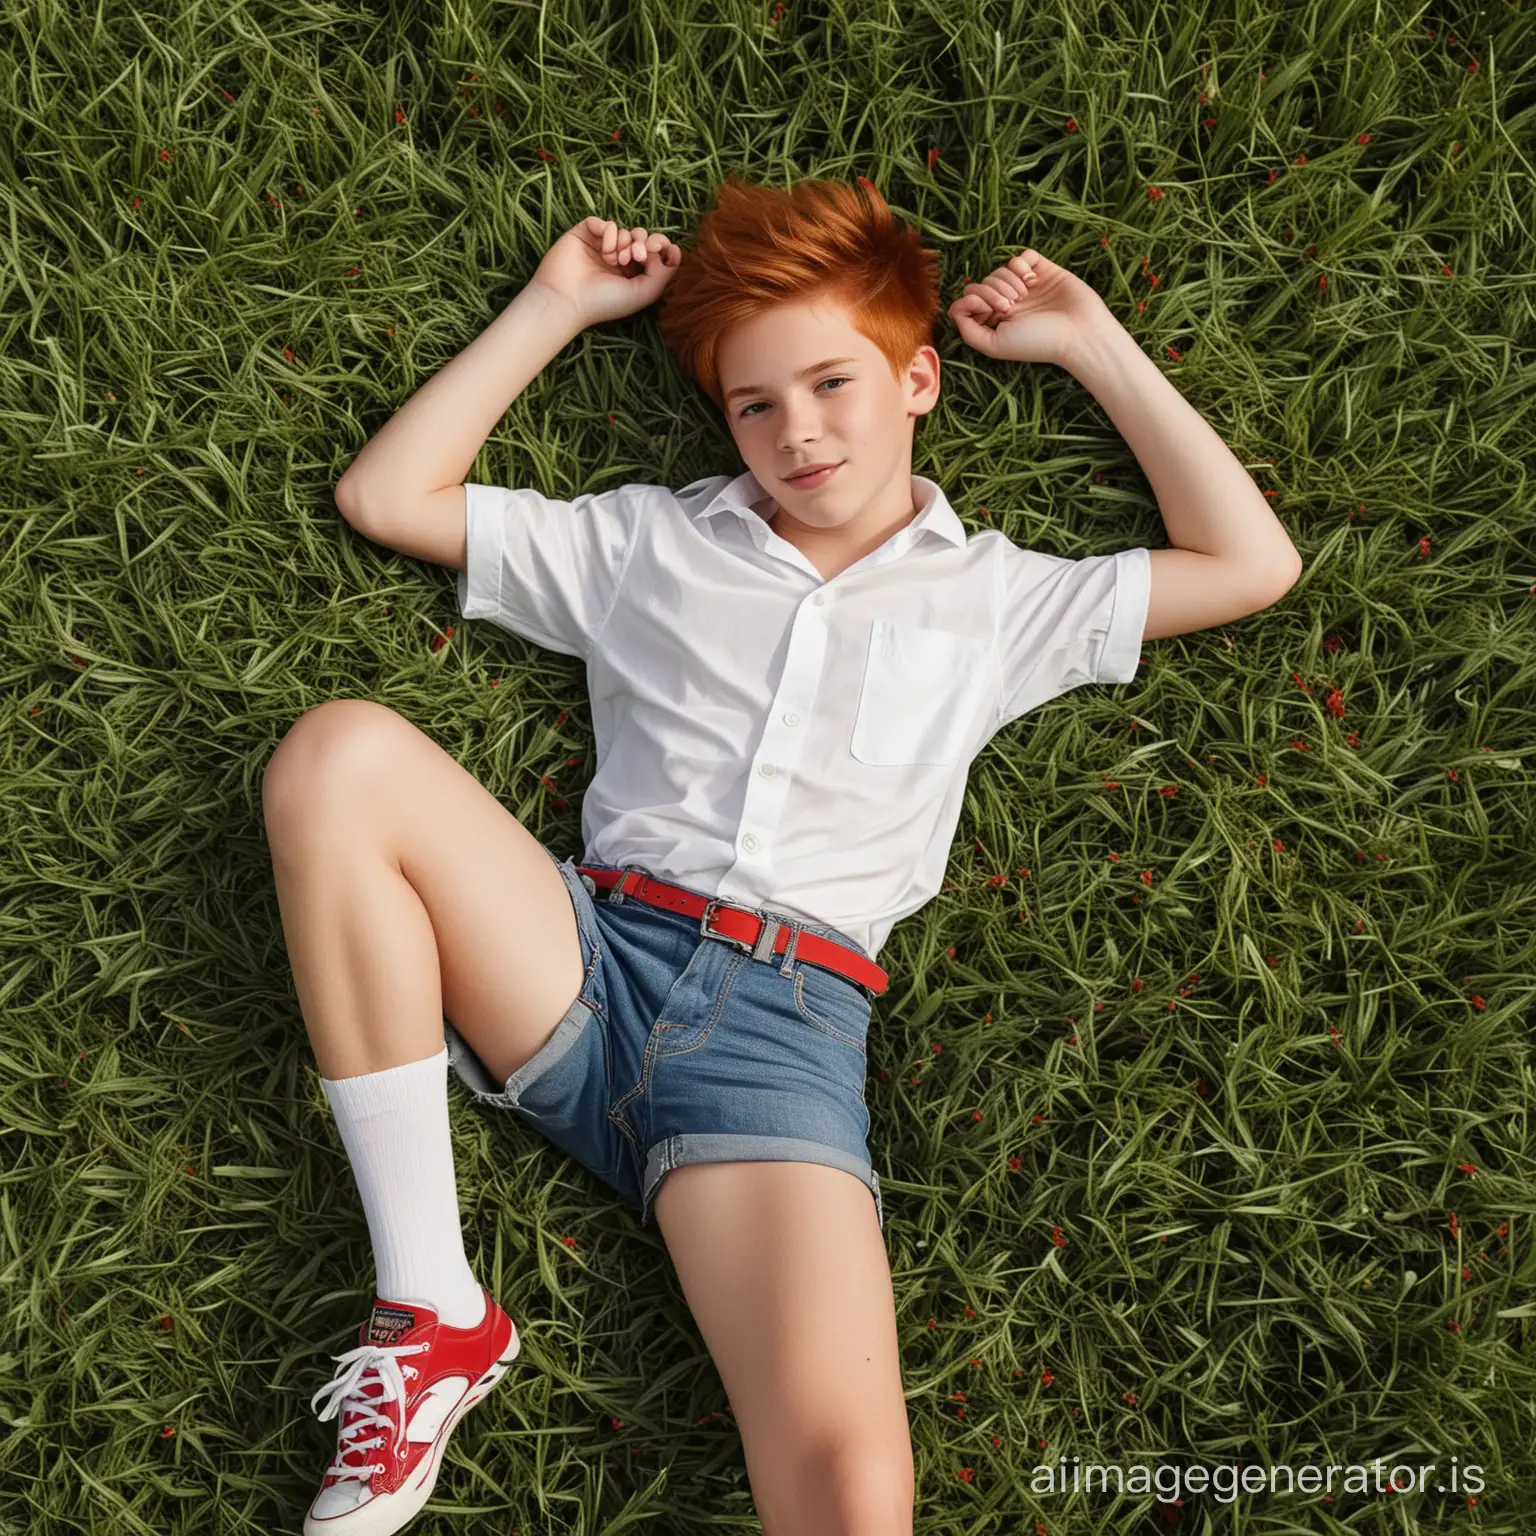 RedHaired-Teen-Boy-Relaxing-in-Lush-Green-Field